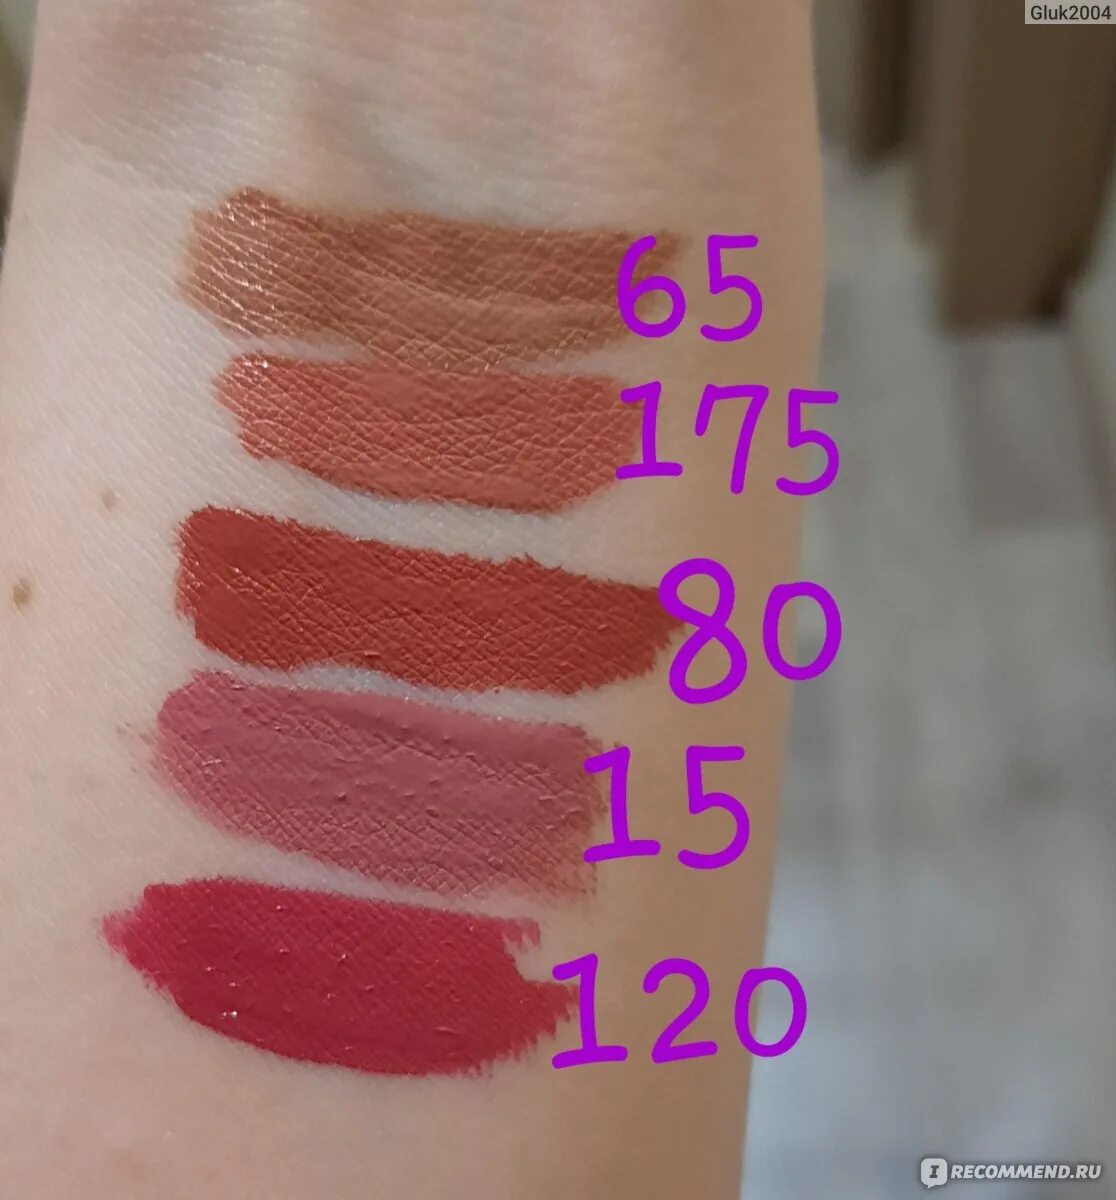 Maybelline super stay 65. Помада Maybelline SUPERSTAY 65. Помада Maybelline super stay Matte Ink 65. Maybelline super stay 175. Помада Maybelline super stay 175 оттенок.